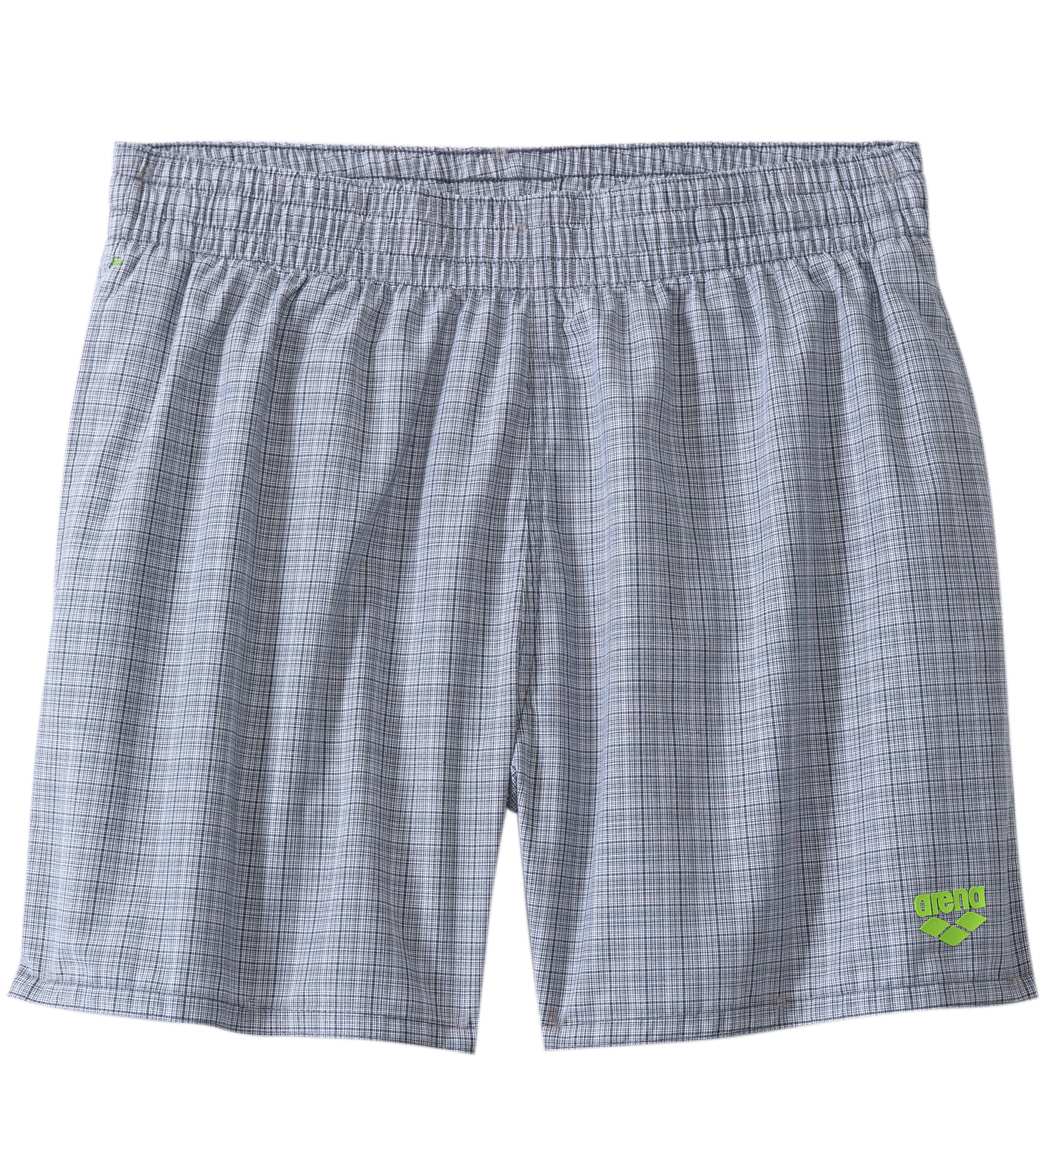 Arena Yarn Dyed Check Swim Trunk - Asphalt X-Small Size X- Small Cotton/Polyester - Swimoutlet.com